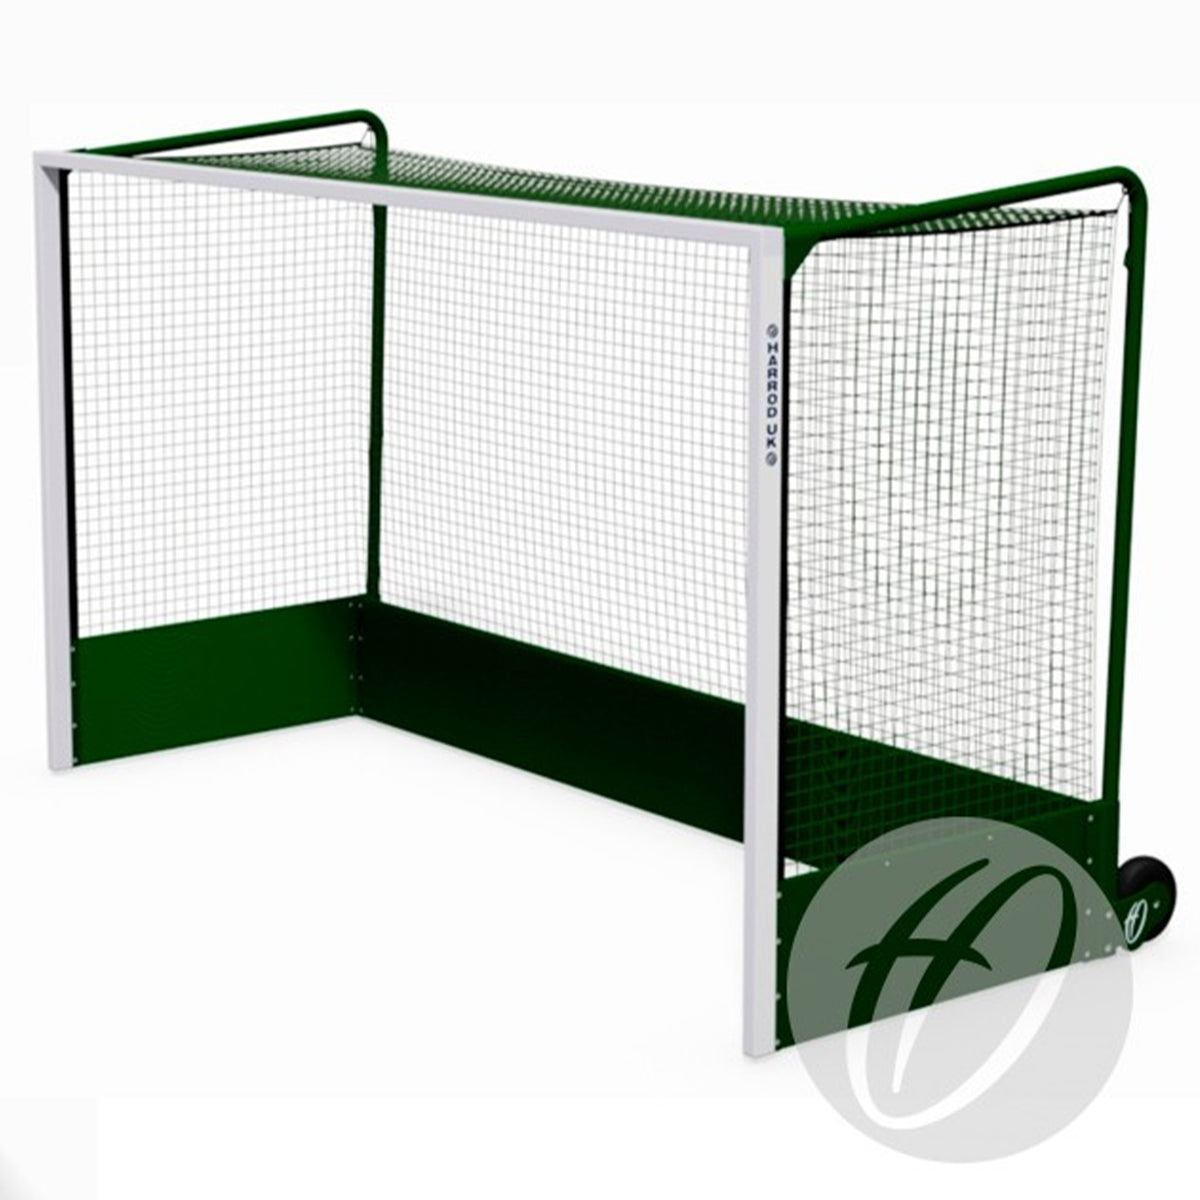 London 2012 Integral Weighted Hockey Goal